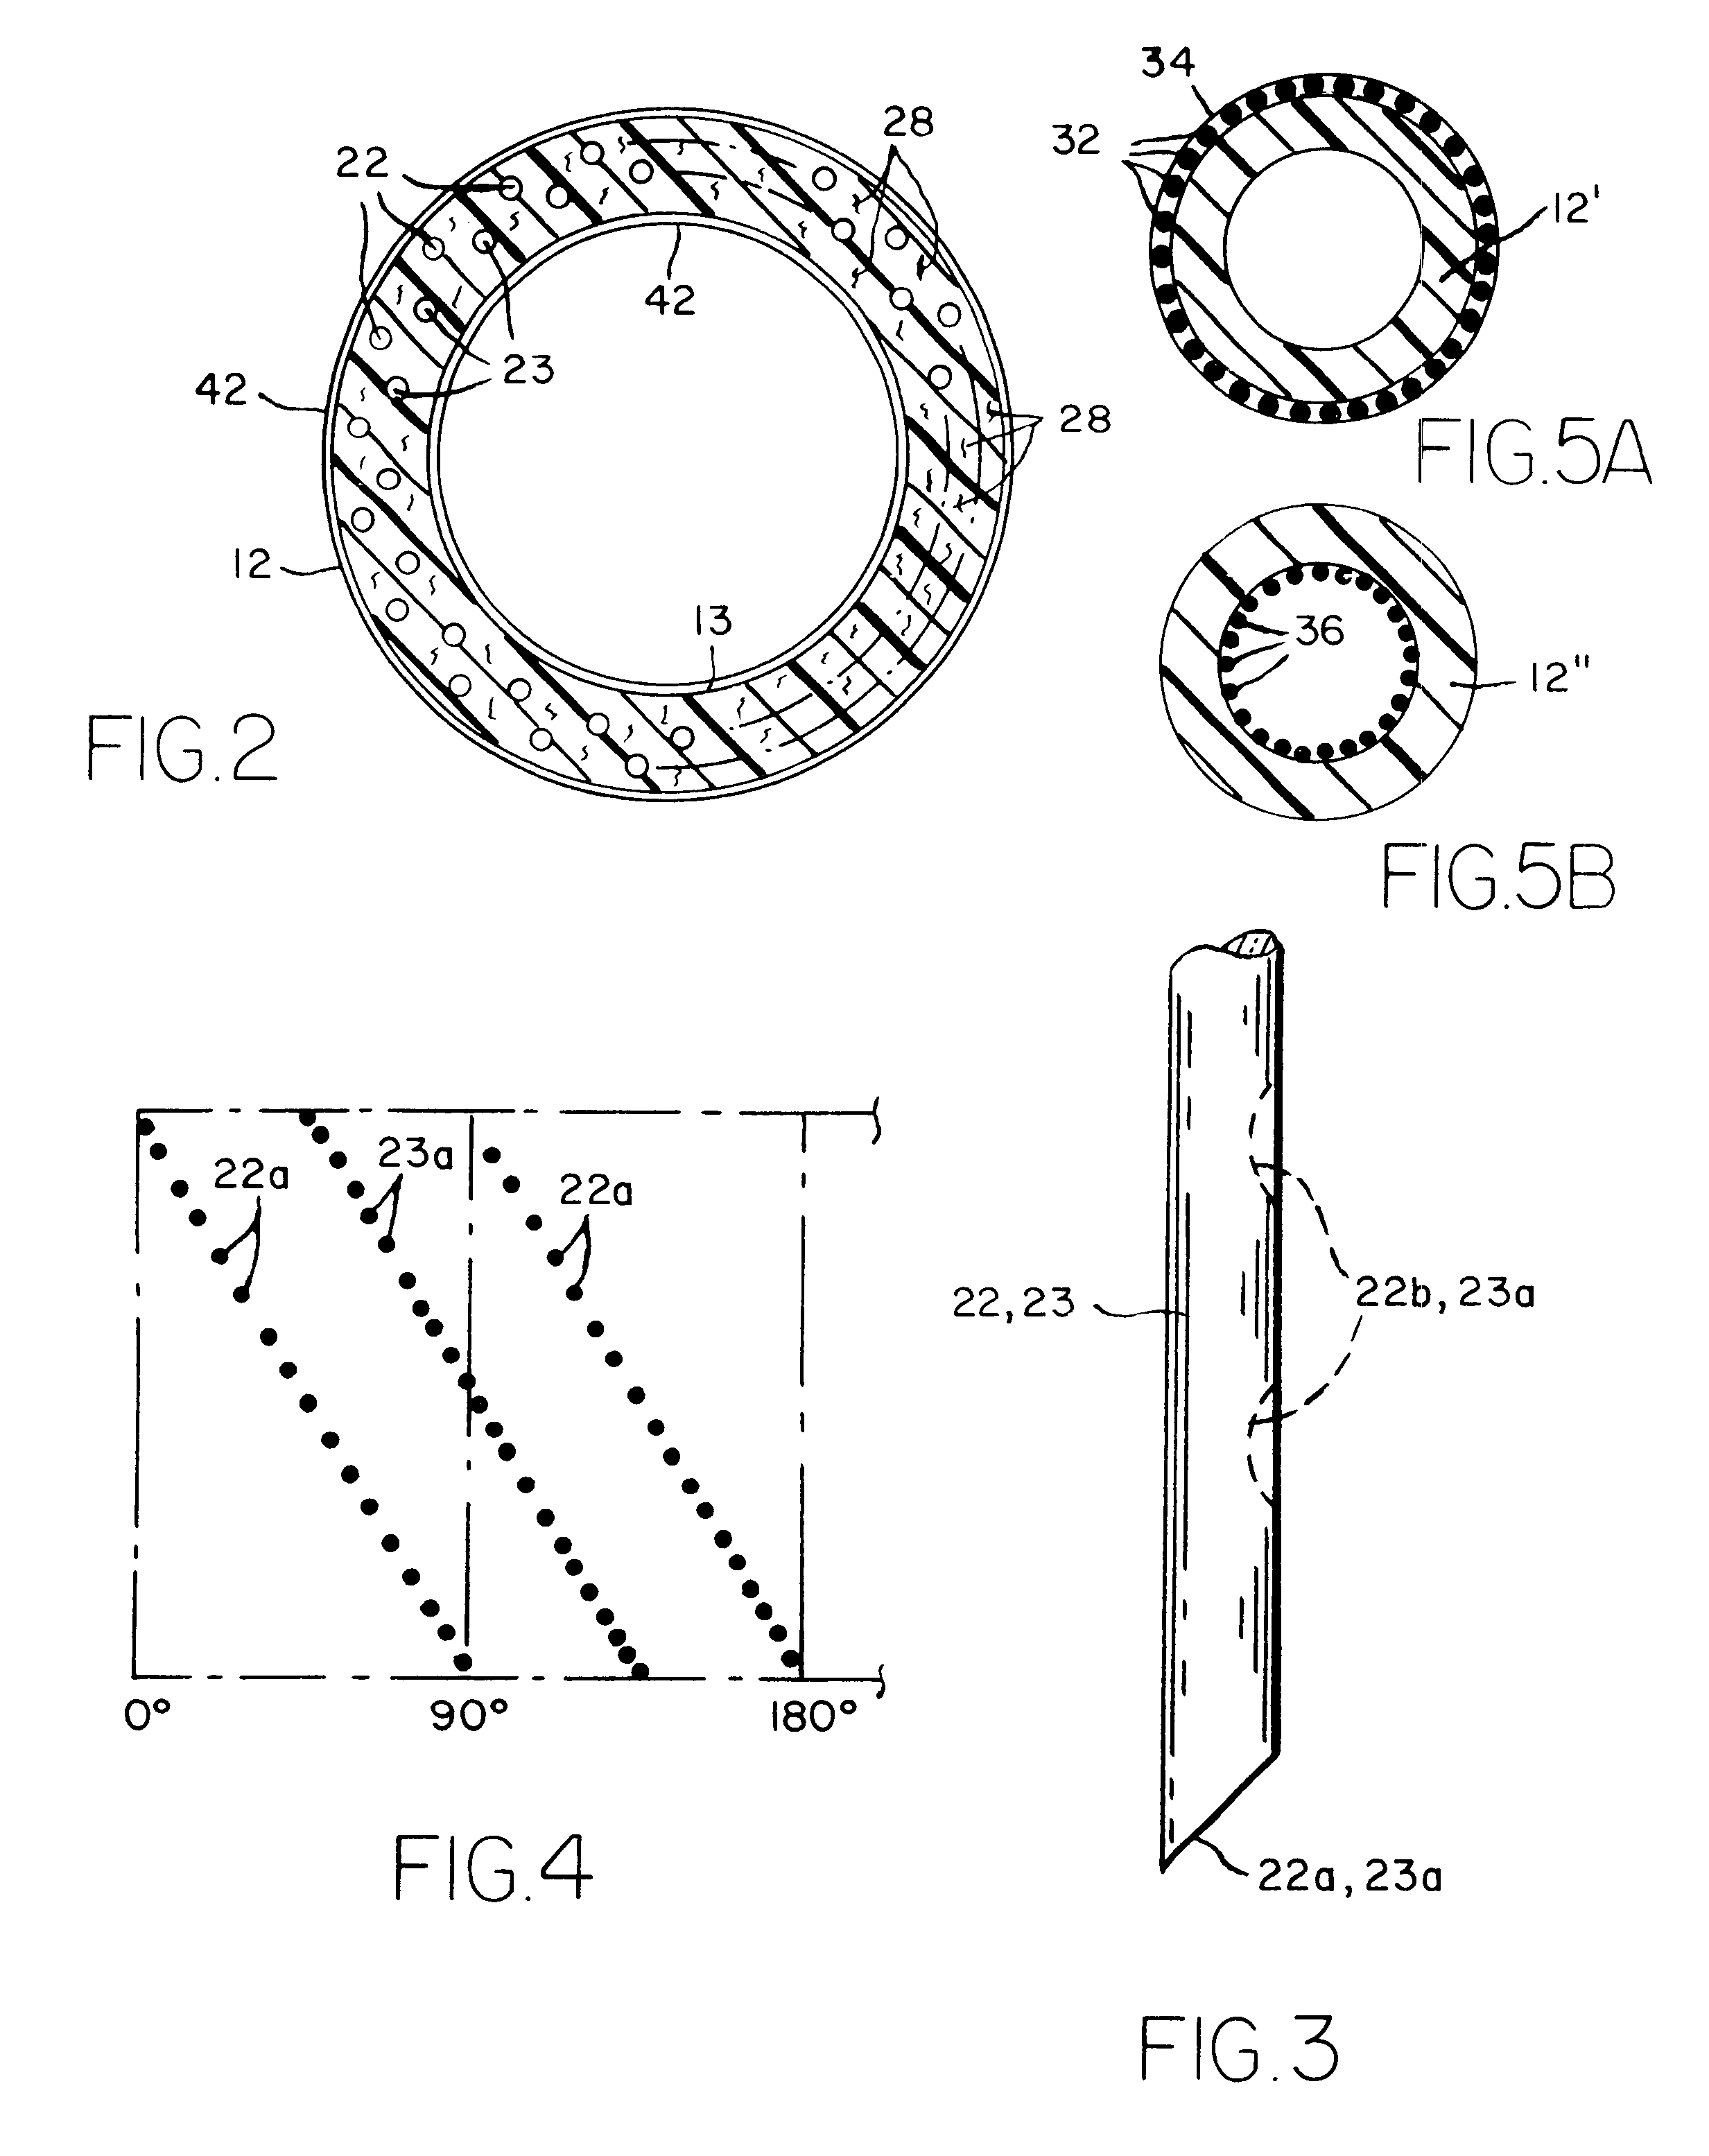 Method and apparatus to prevent infections